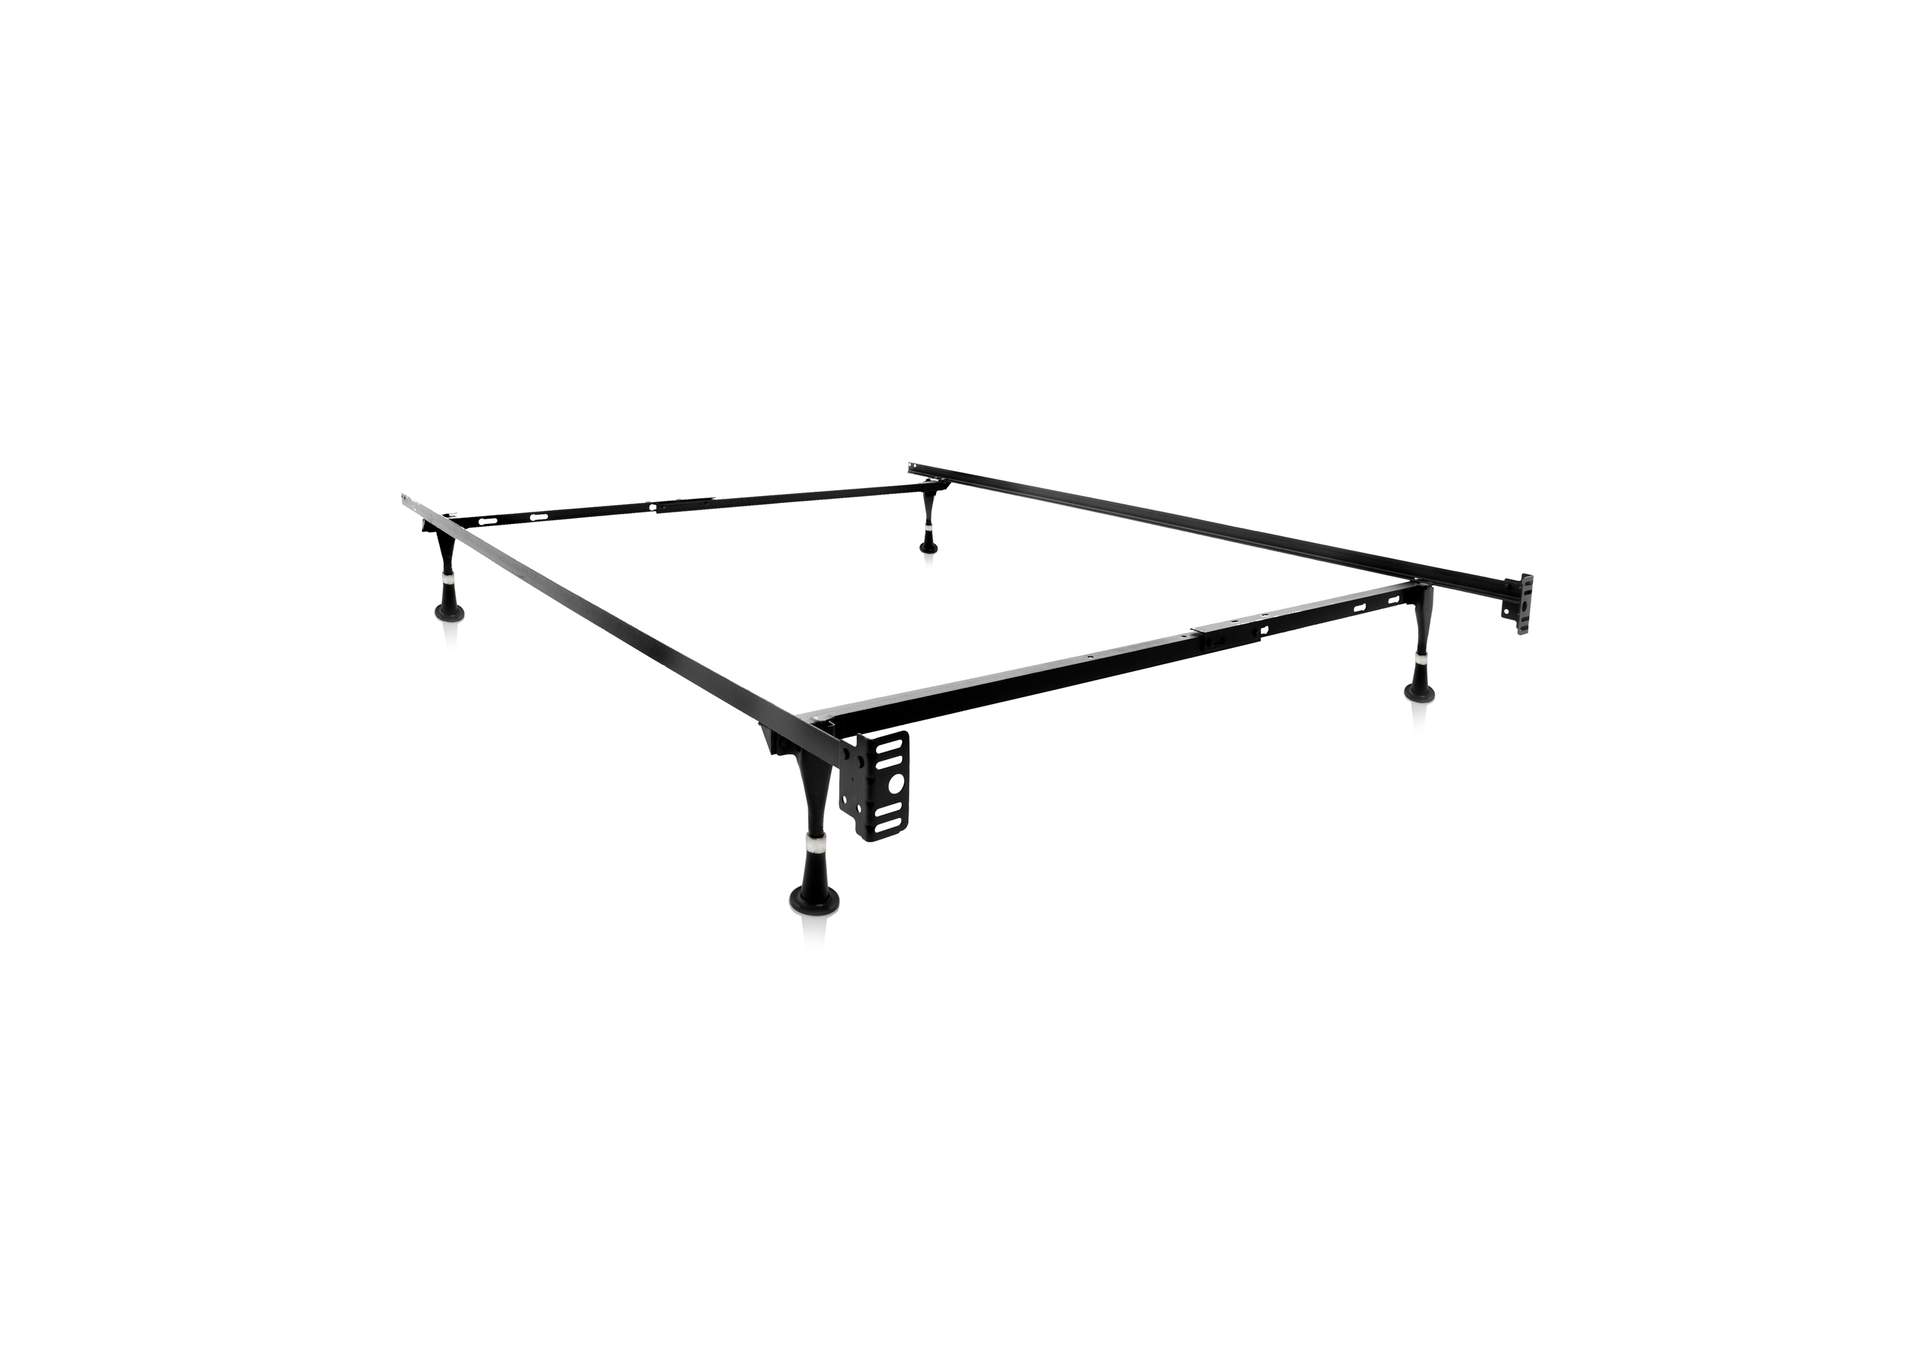 Malouf Metal Adjustable Bed Frame - Twin/Full Rollers Size,Malouf